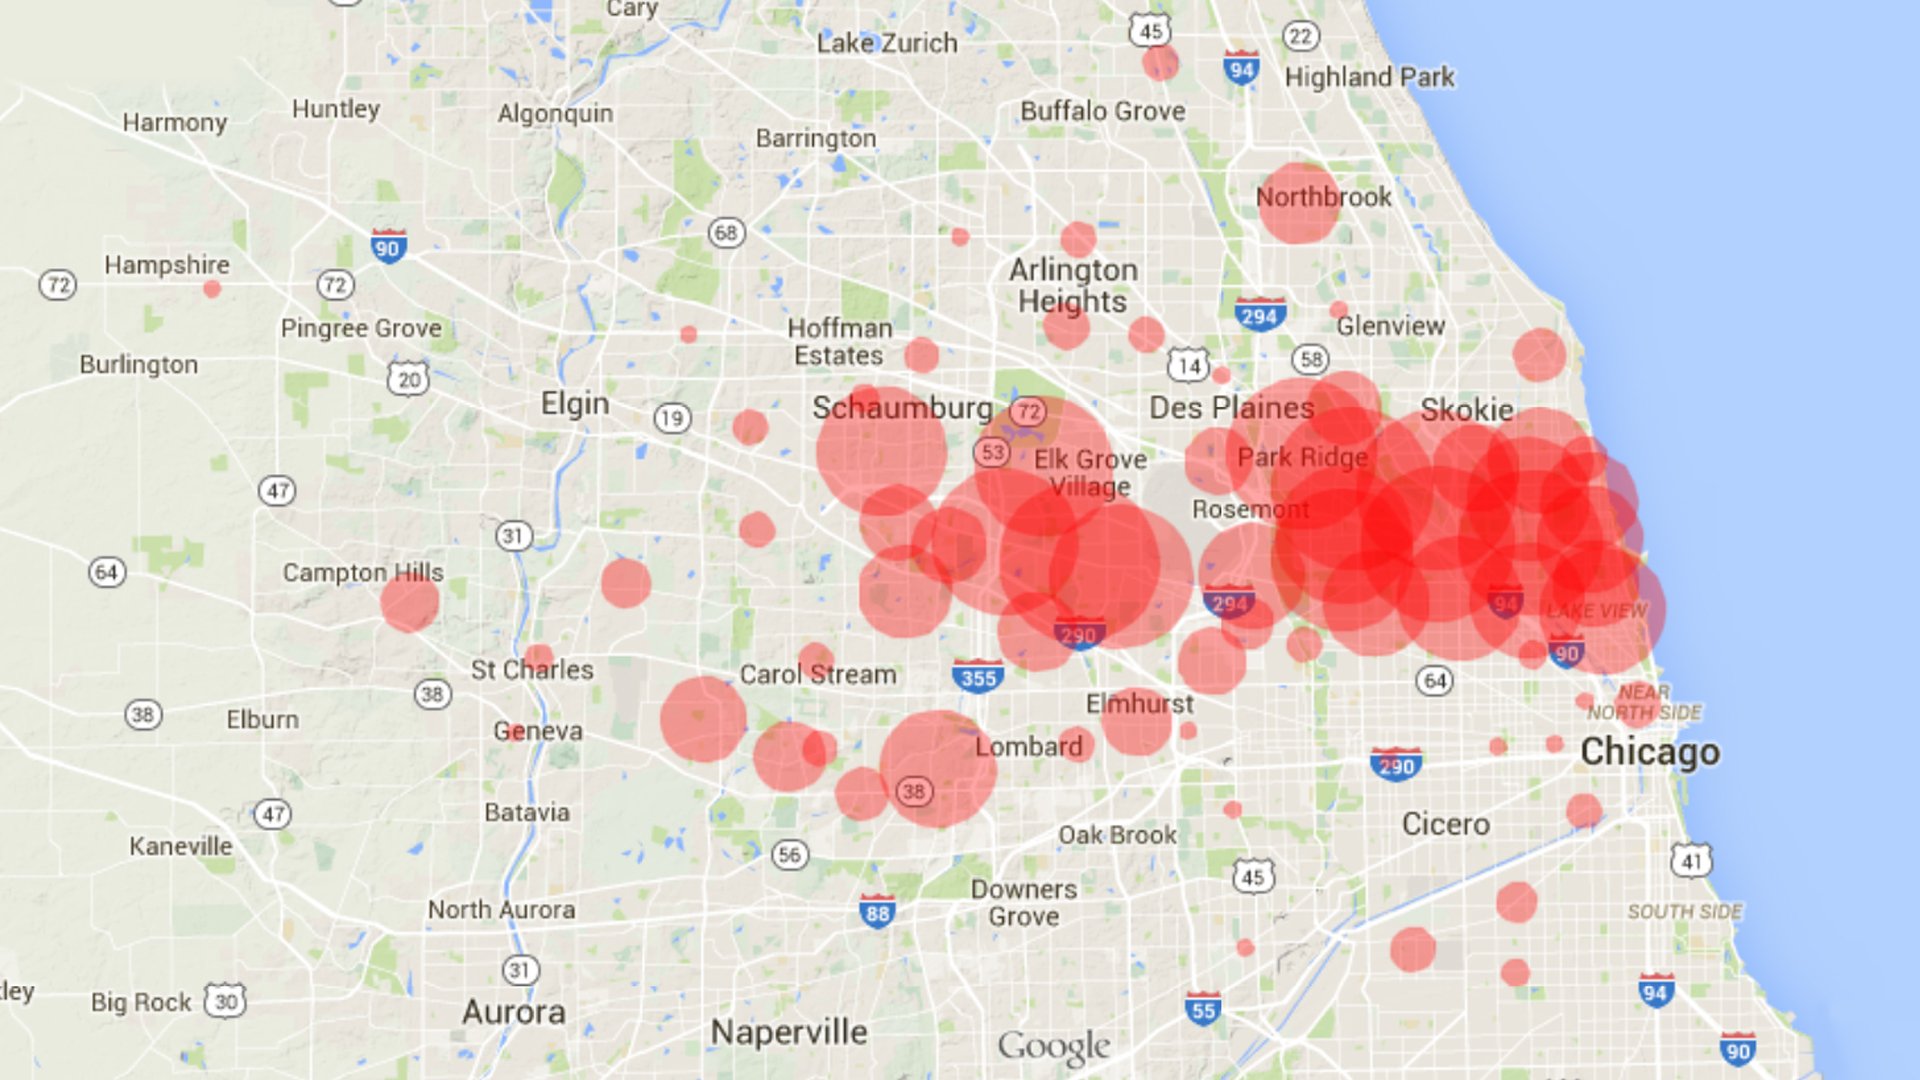 O'Hare noise complaint location and density map.